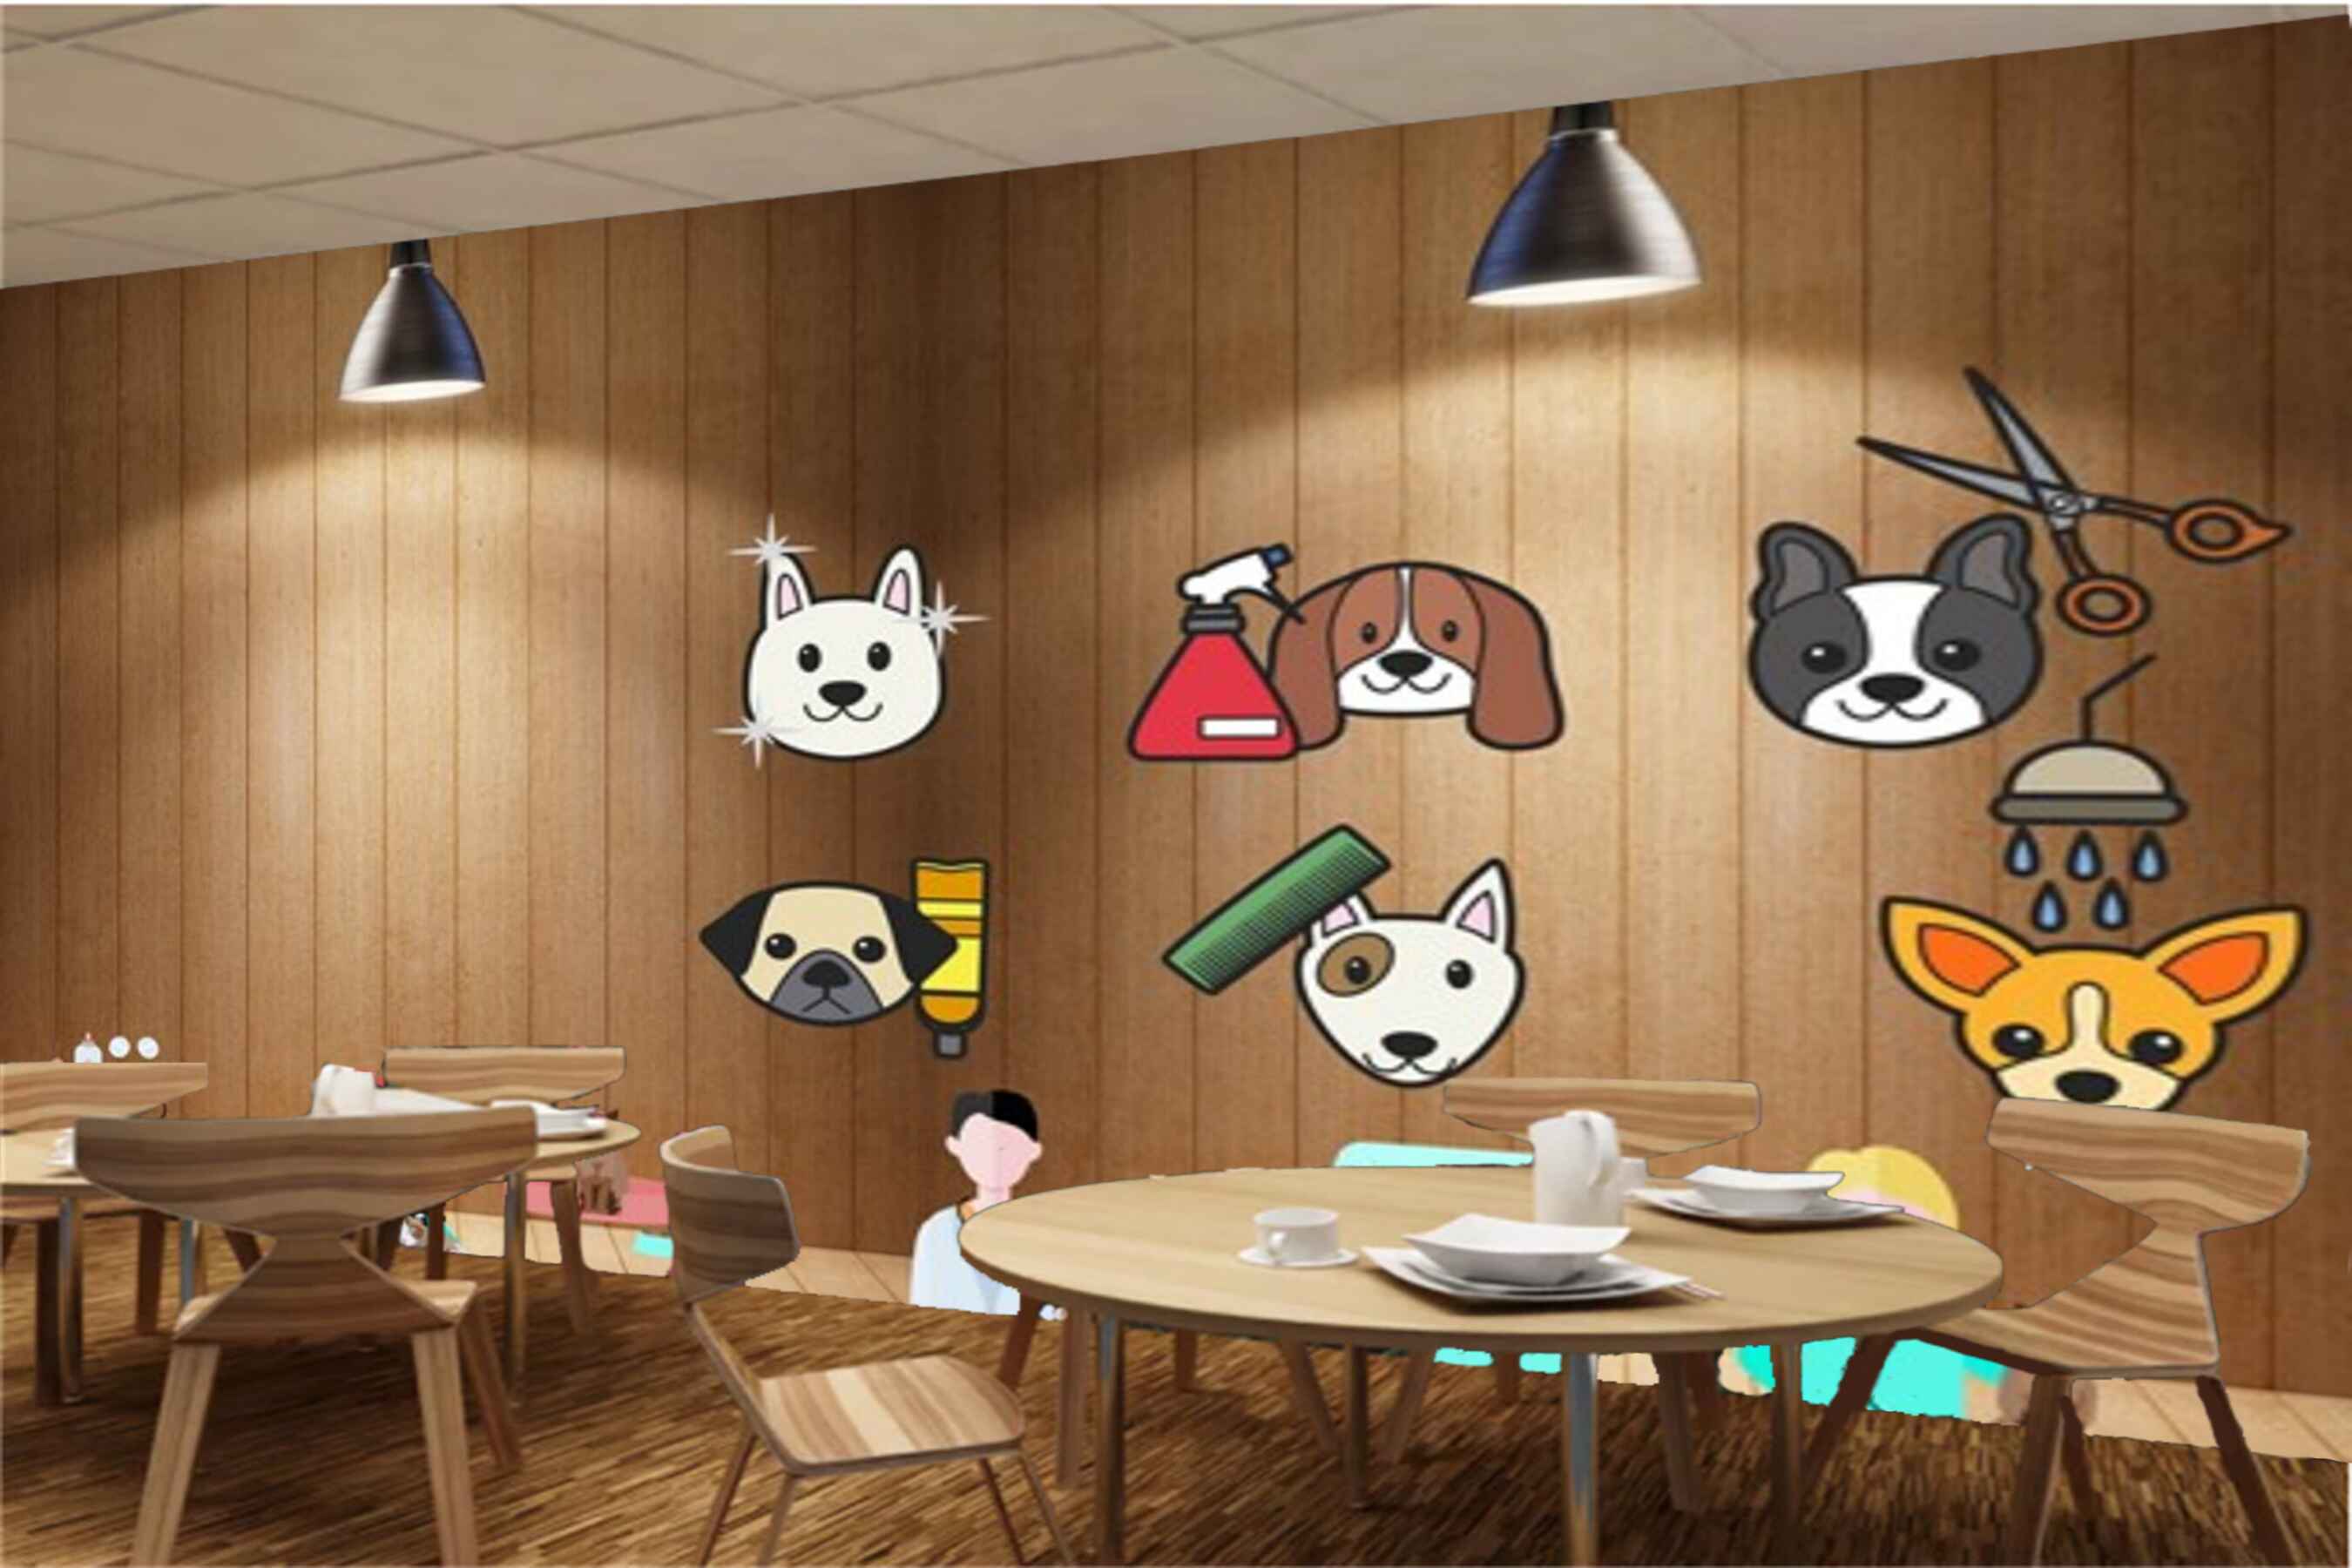 Avikalp MWZ3120 Animal Faces Lamps Pets Lovers HD Wallpaper for Cafe Restaurant